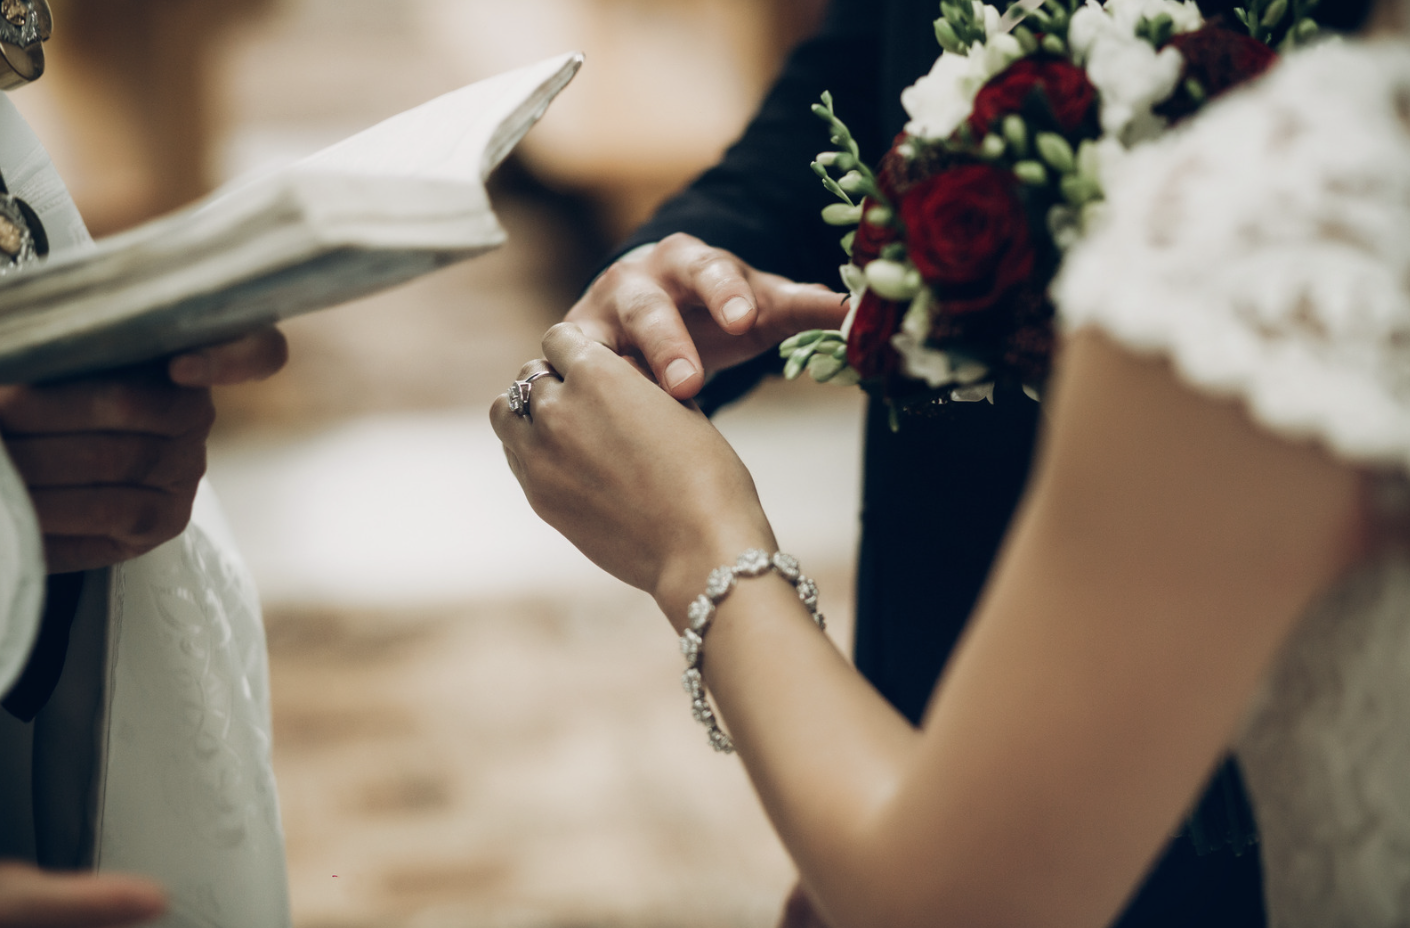 A wedded couple exchange wedding rings on the ceremony.